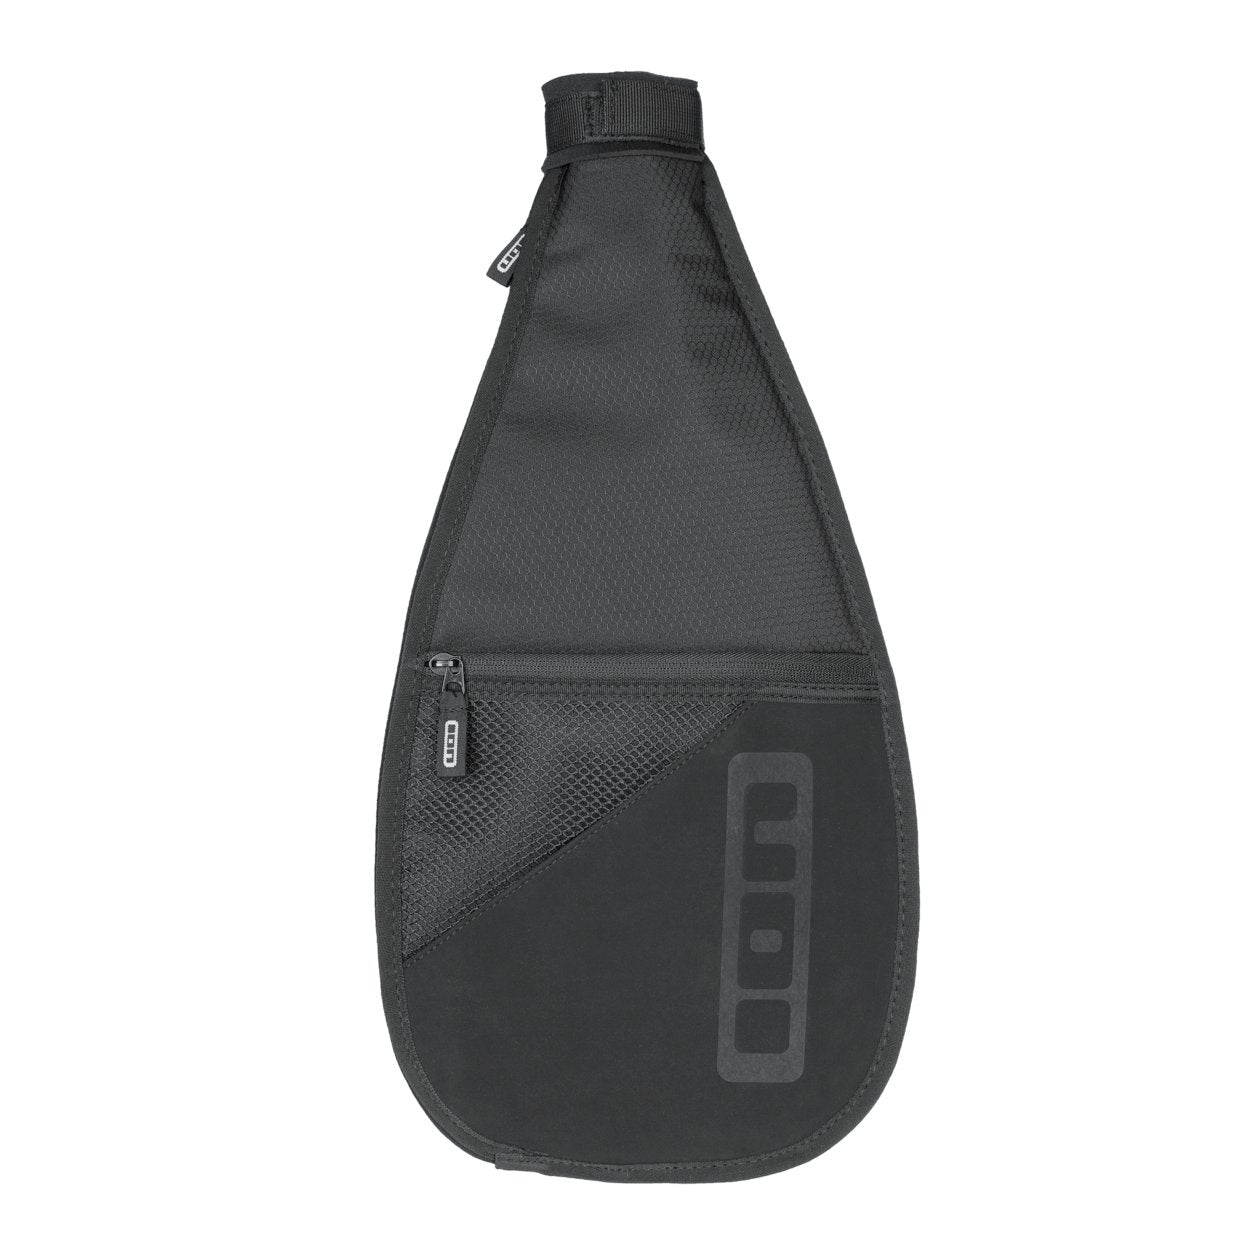 ION Blade Bag 2022 - Worthing Watersports - 9008415685035 - Accessories - ION Water